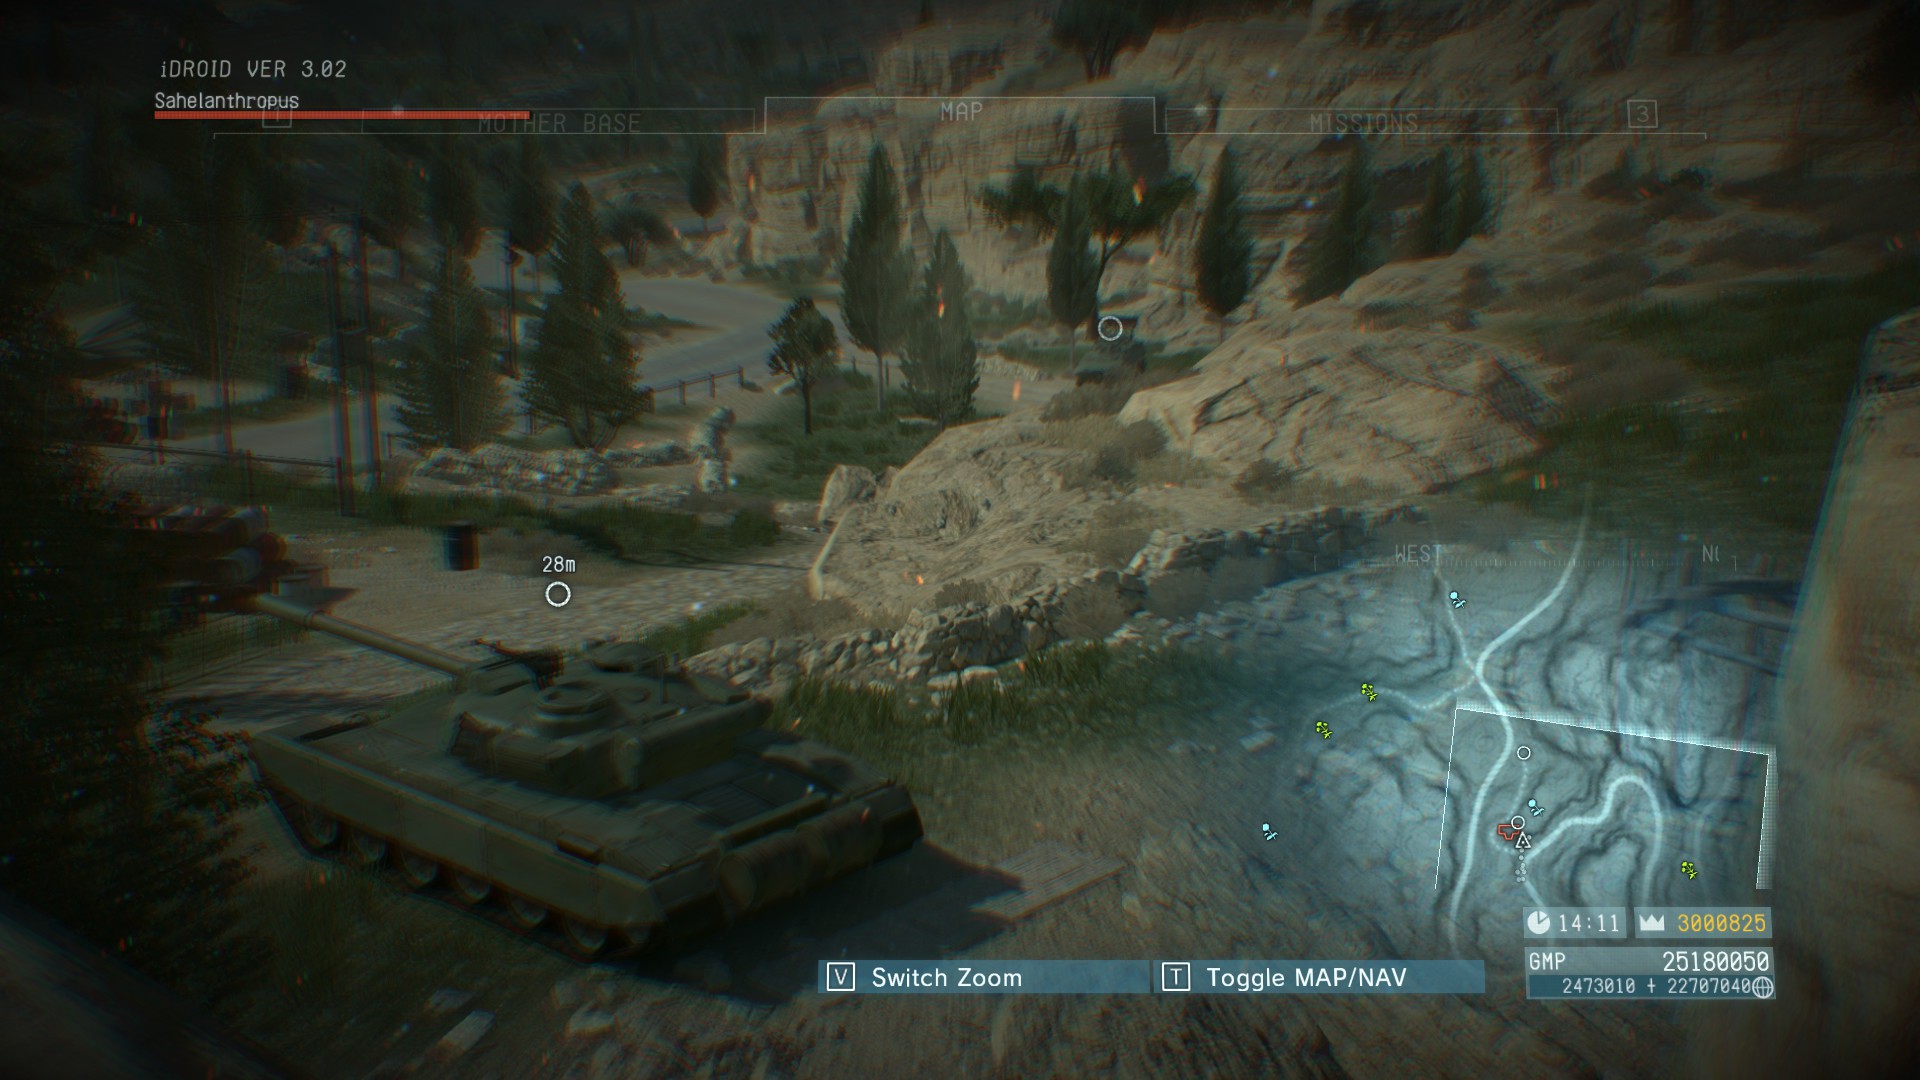 METAL GEAR SOLID V: THE PHANTOM PAIN - All Vehicles and Missions Guide - Sahelanthropus - 1C2EDFE